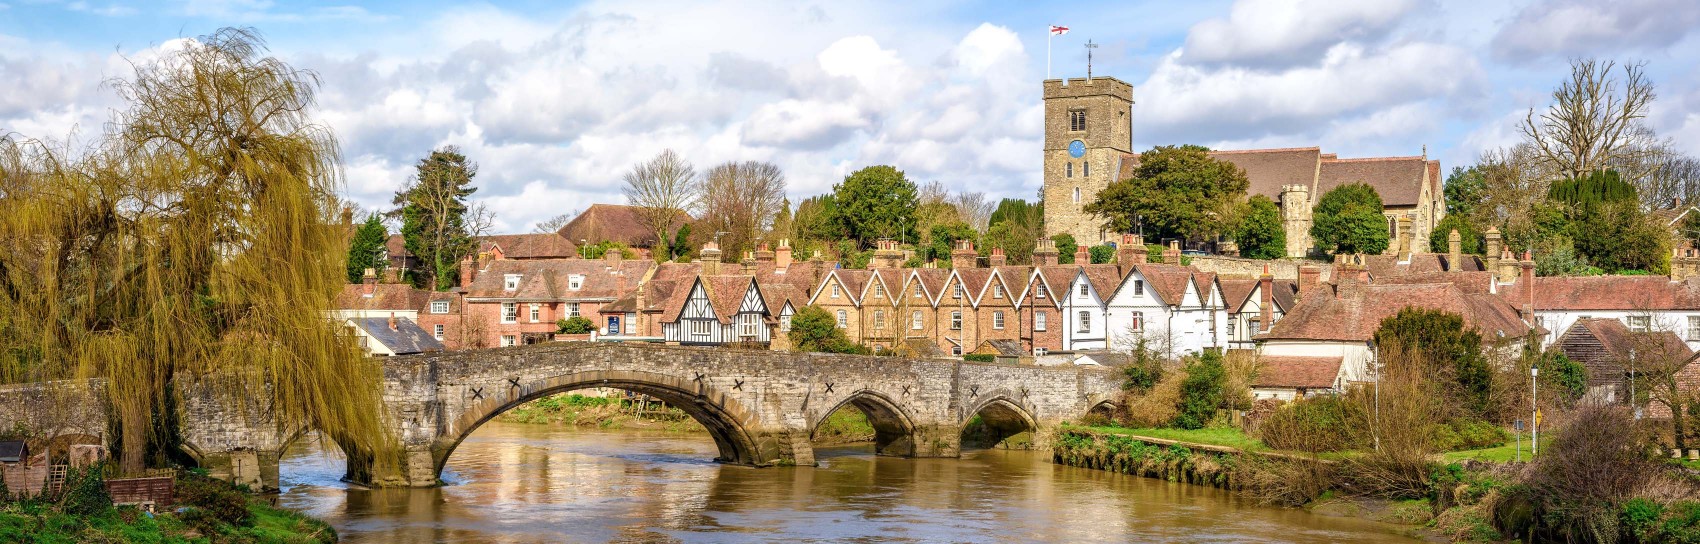 The medieval bridge and church at Aylesford in Kent. Photograph by VALERY EGOROV